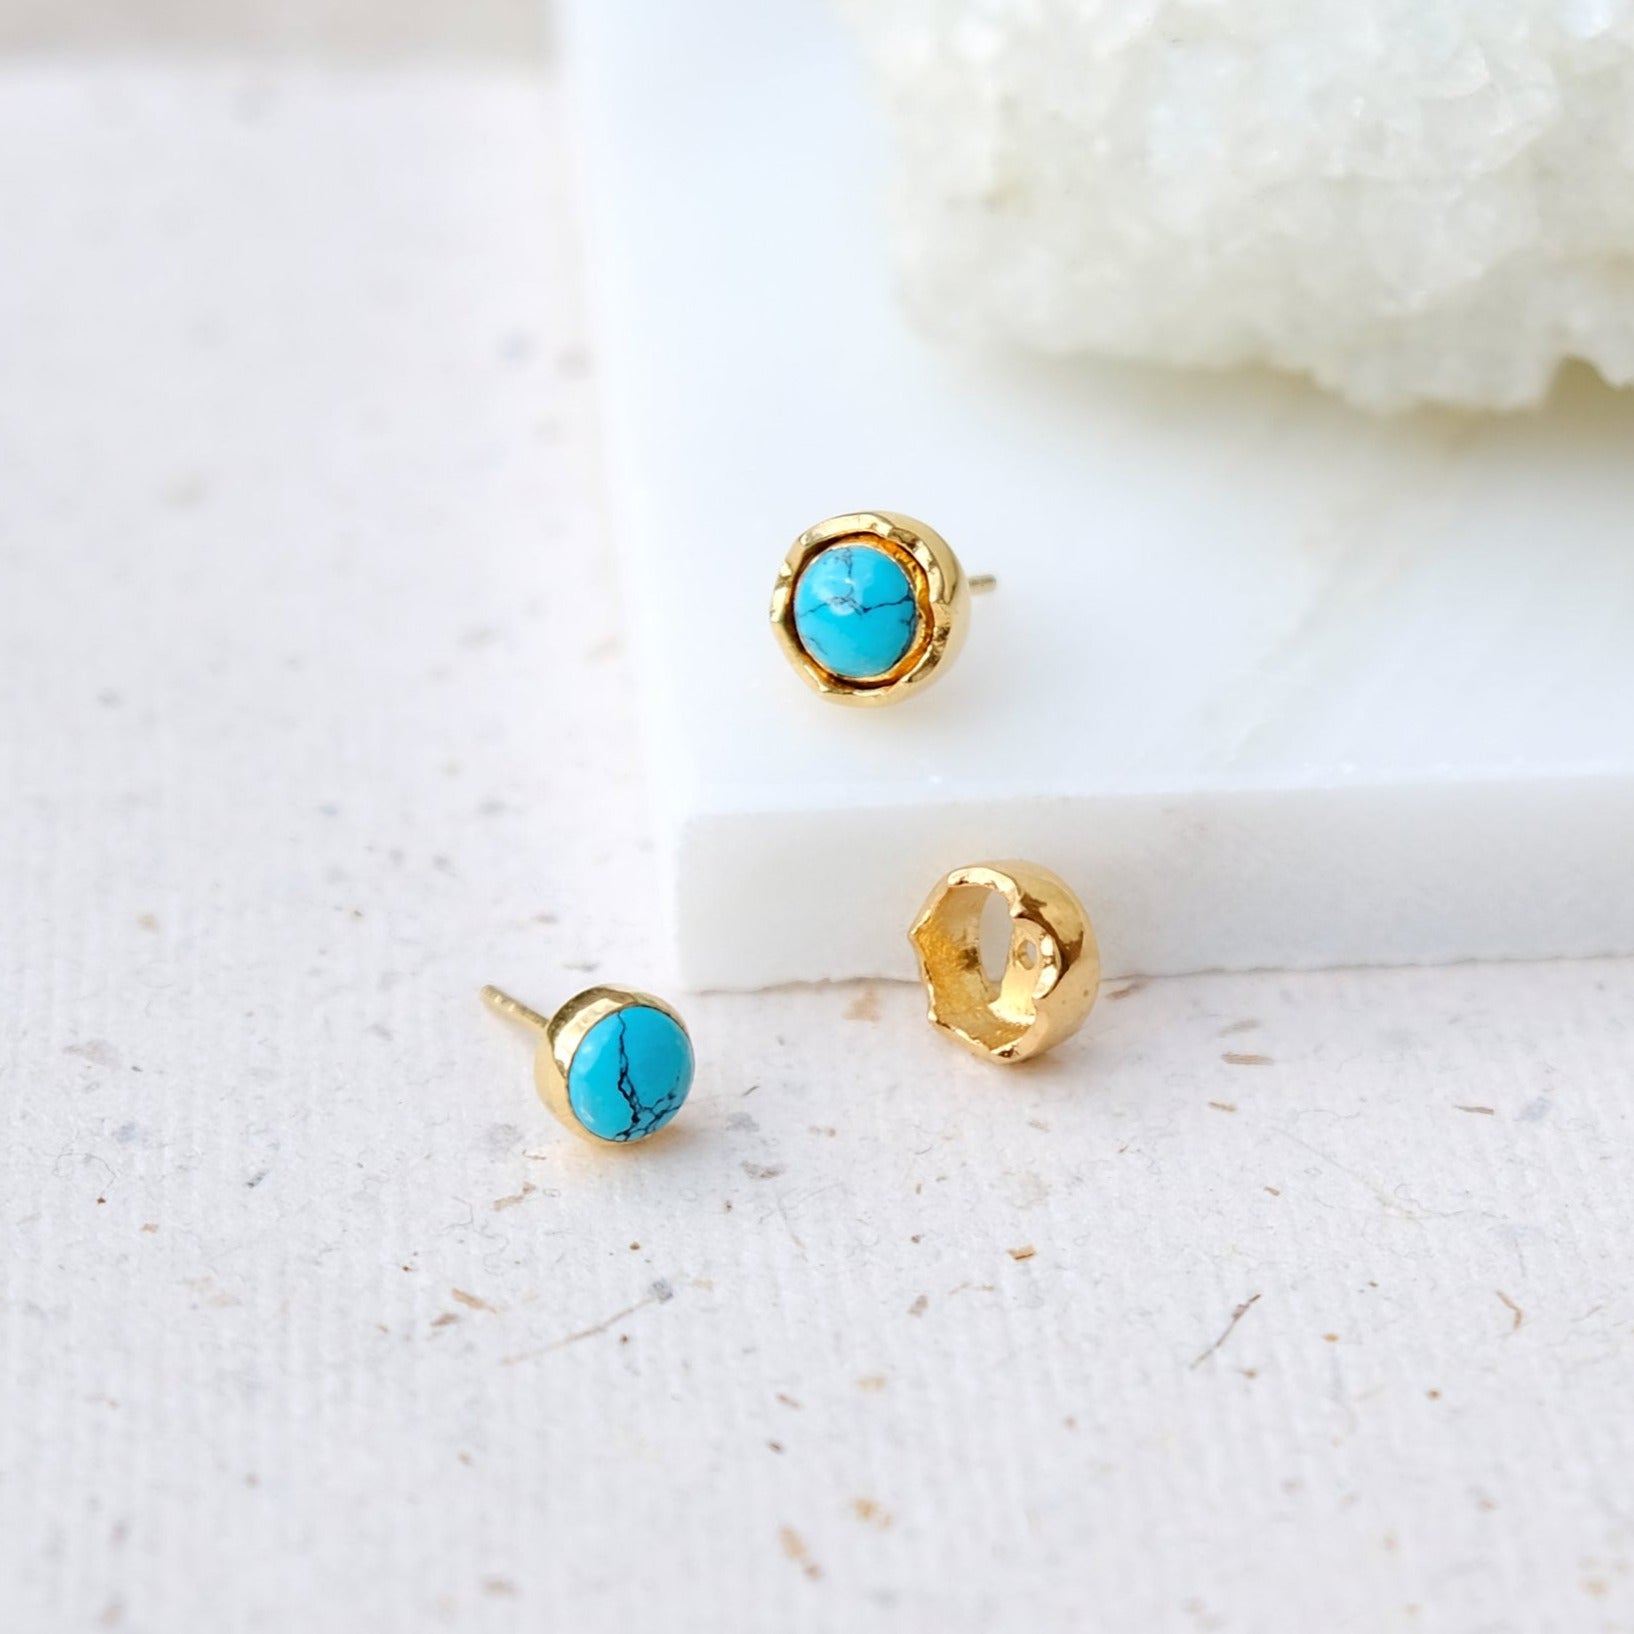 GOLD AND TURQUOISE STUD EARRINGS